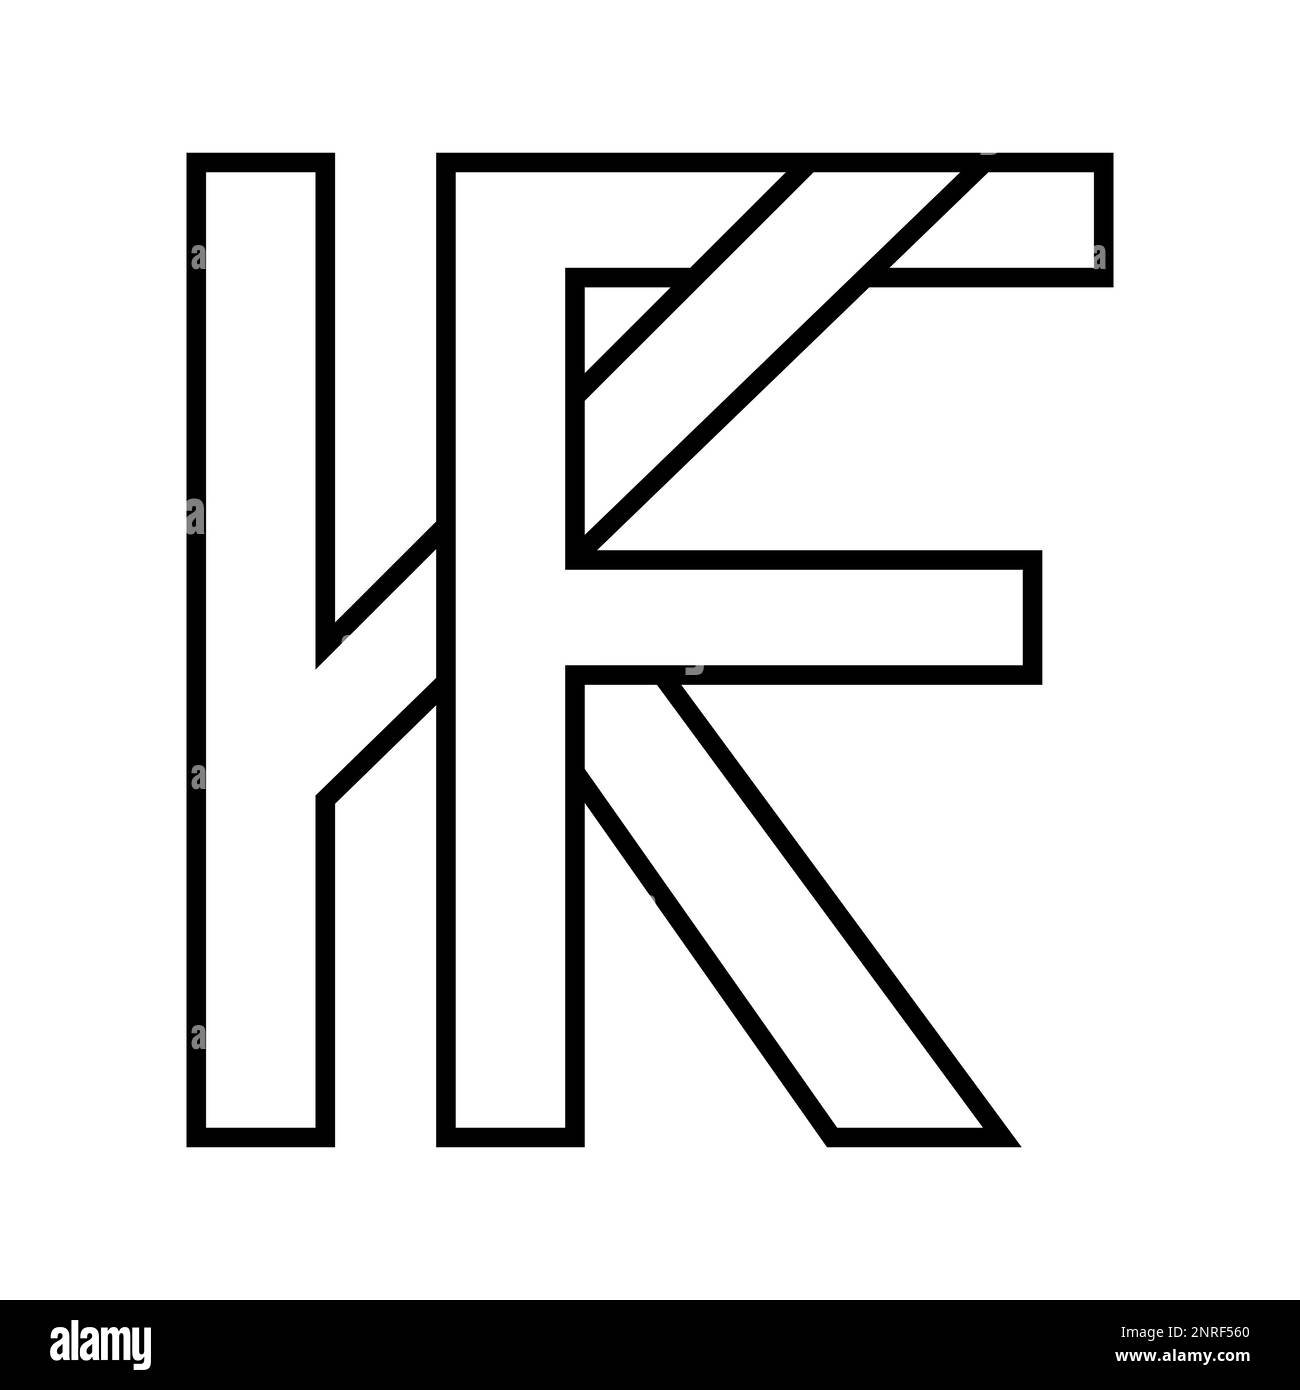 Logo sign kf fk, icon double letters logotype f k Stock Vector